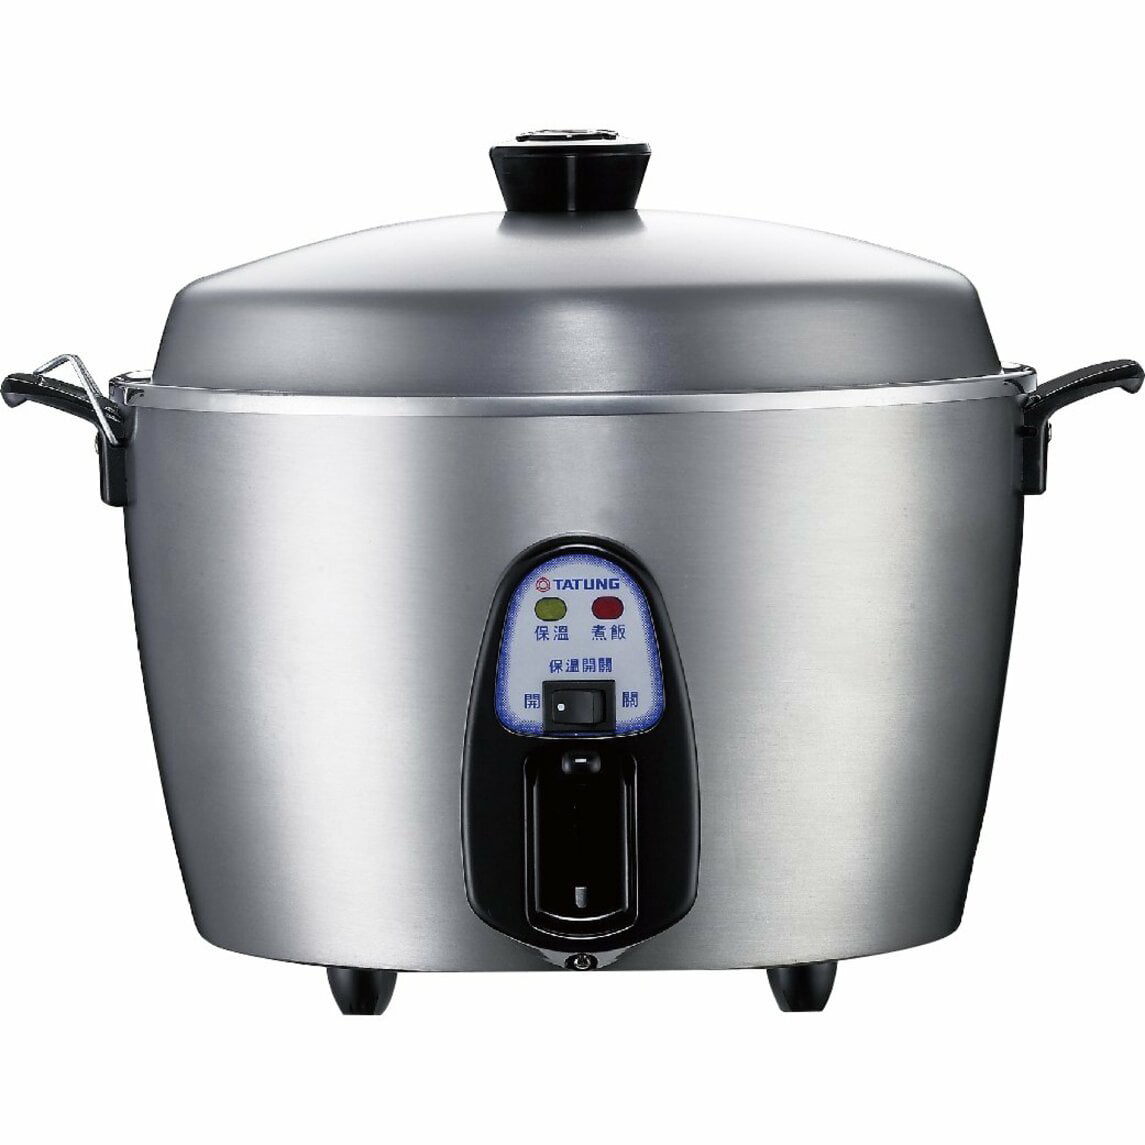 Tatung Electric Rice Cooker and Steamer (11-Cup Stainless Steel